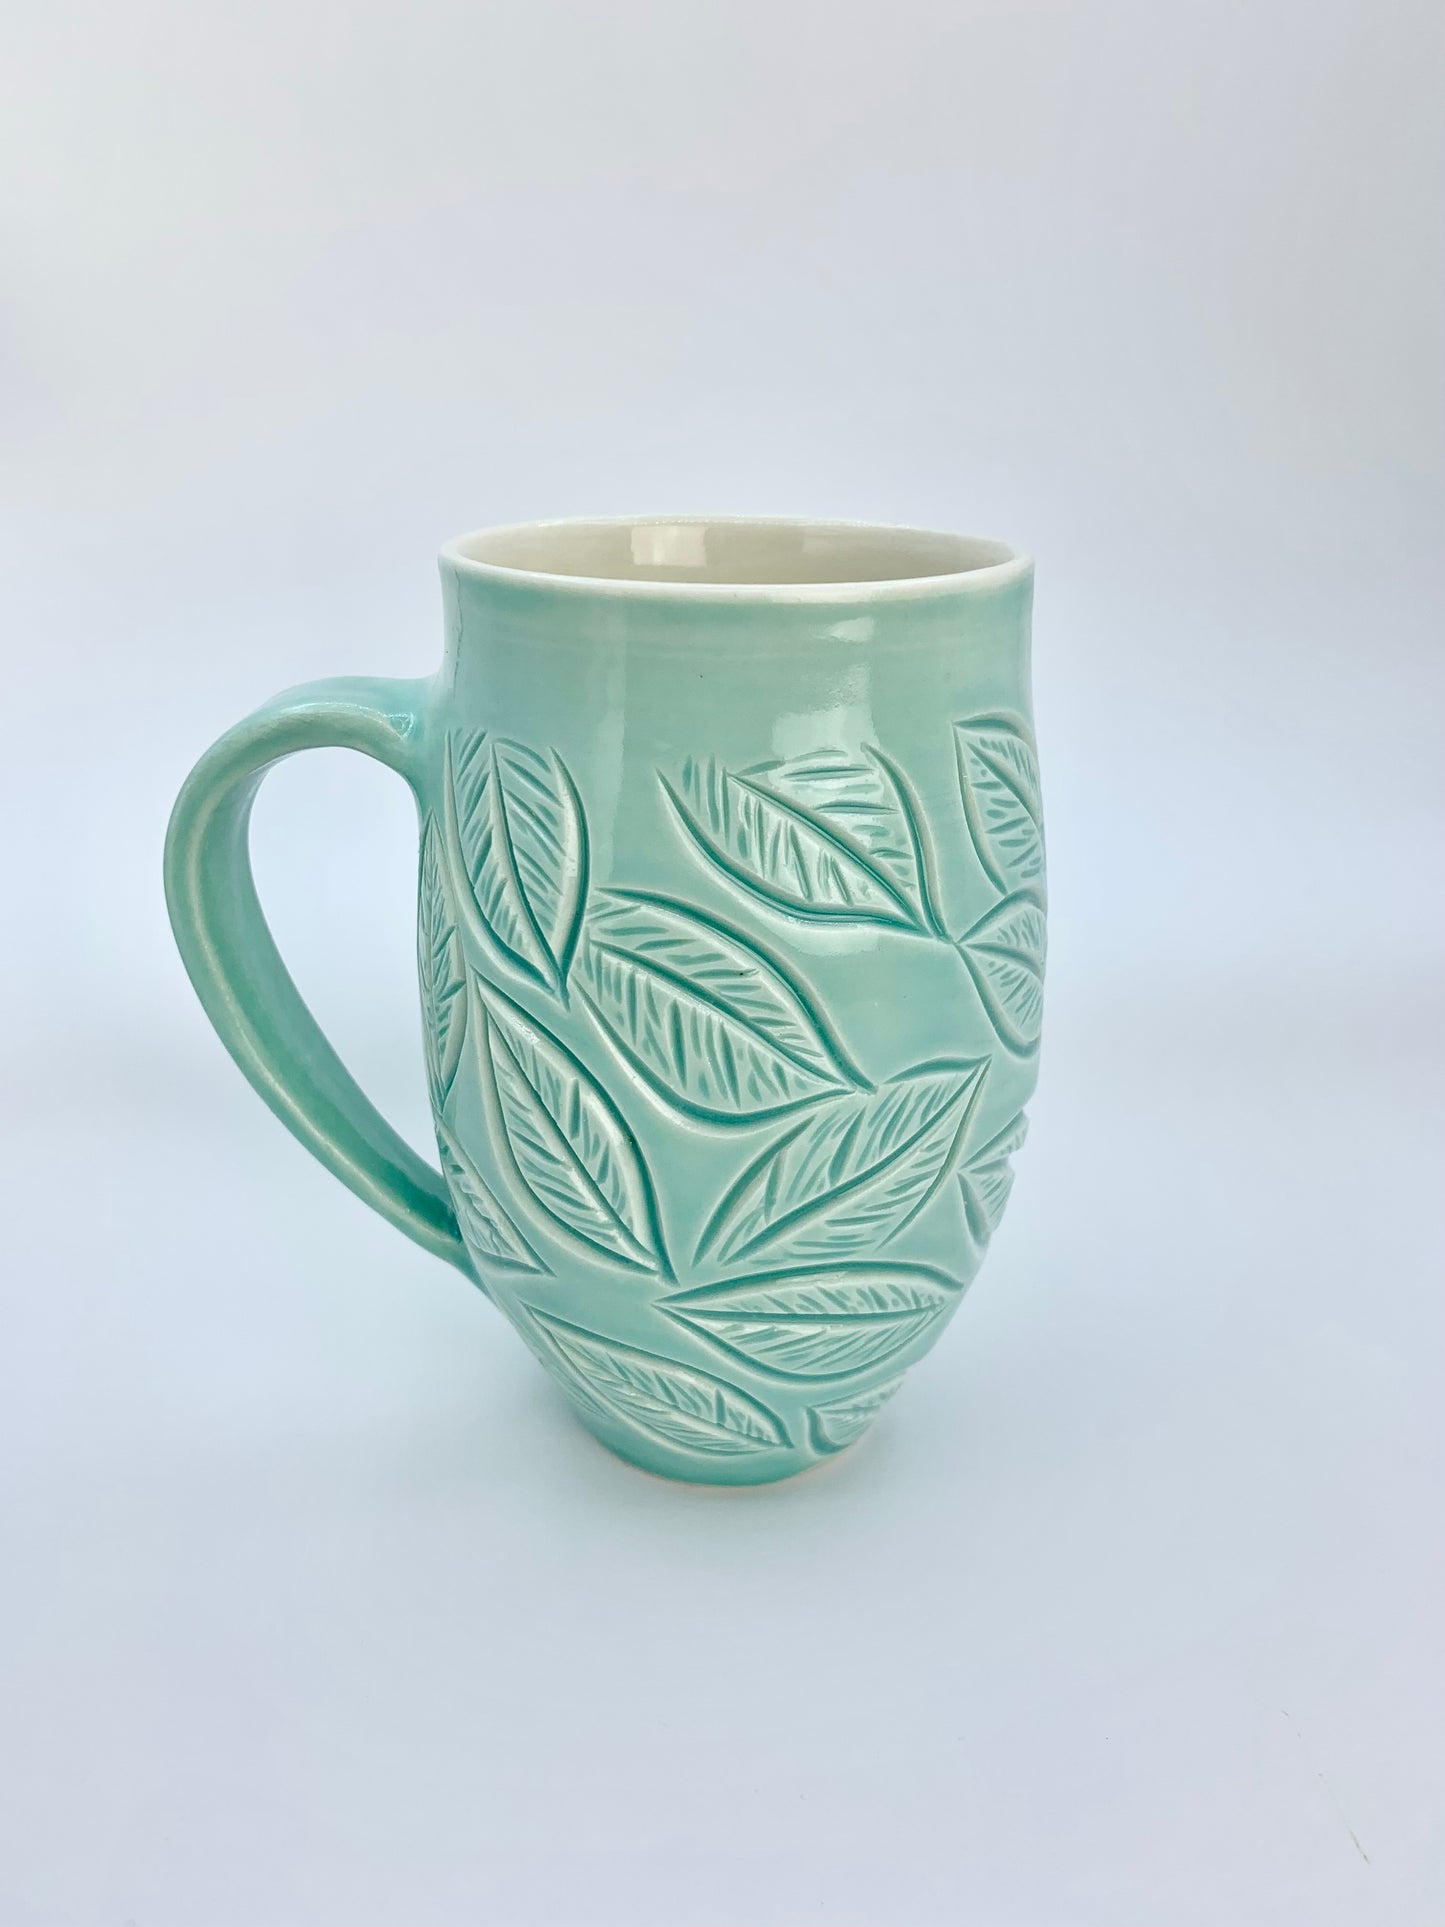 Large porcelain mug with leaf carvings in turquoise